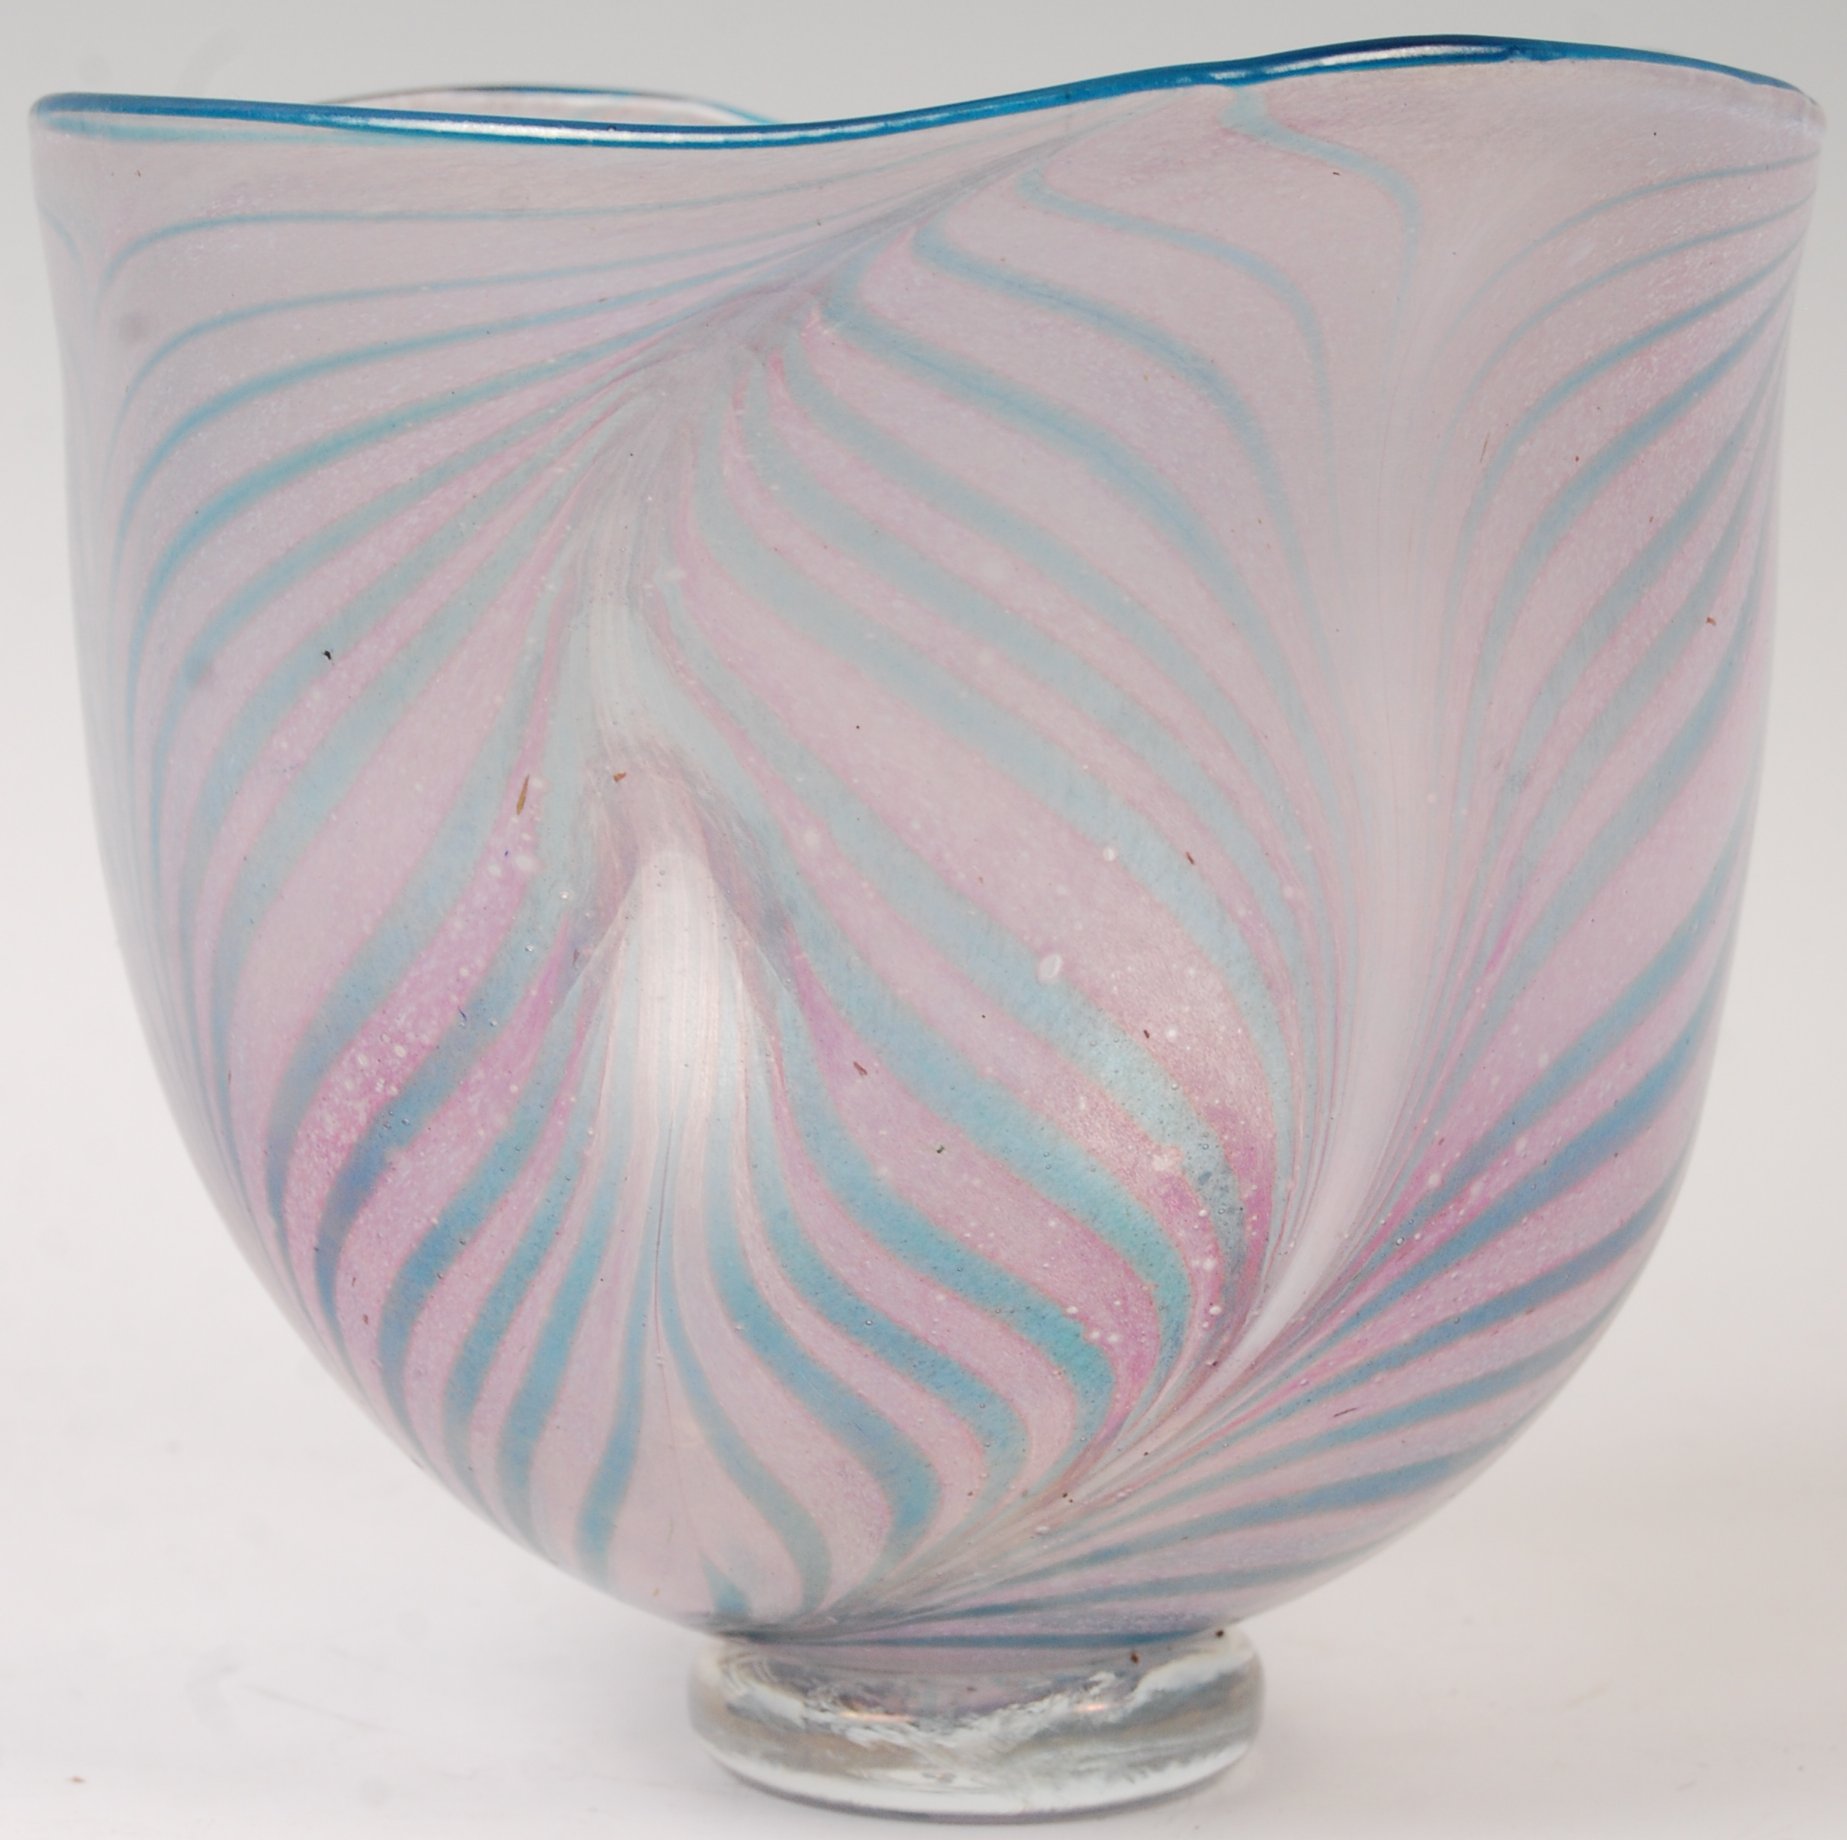 LINDEAN MILL SCOTTISH STUDIO GLASS BY A. SANDSTROM